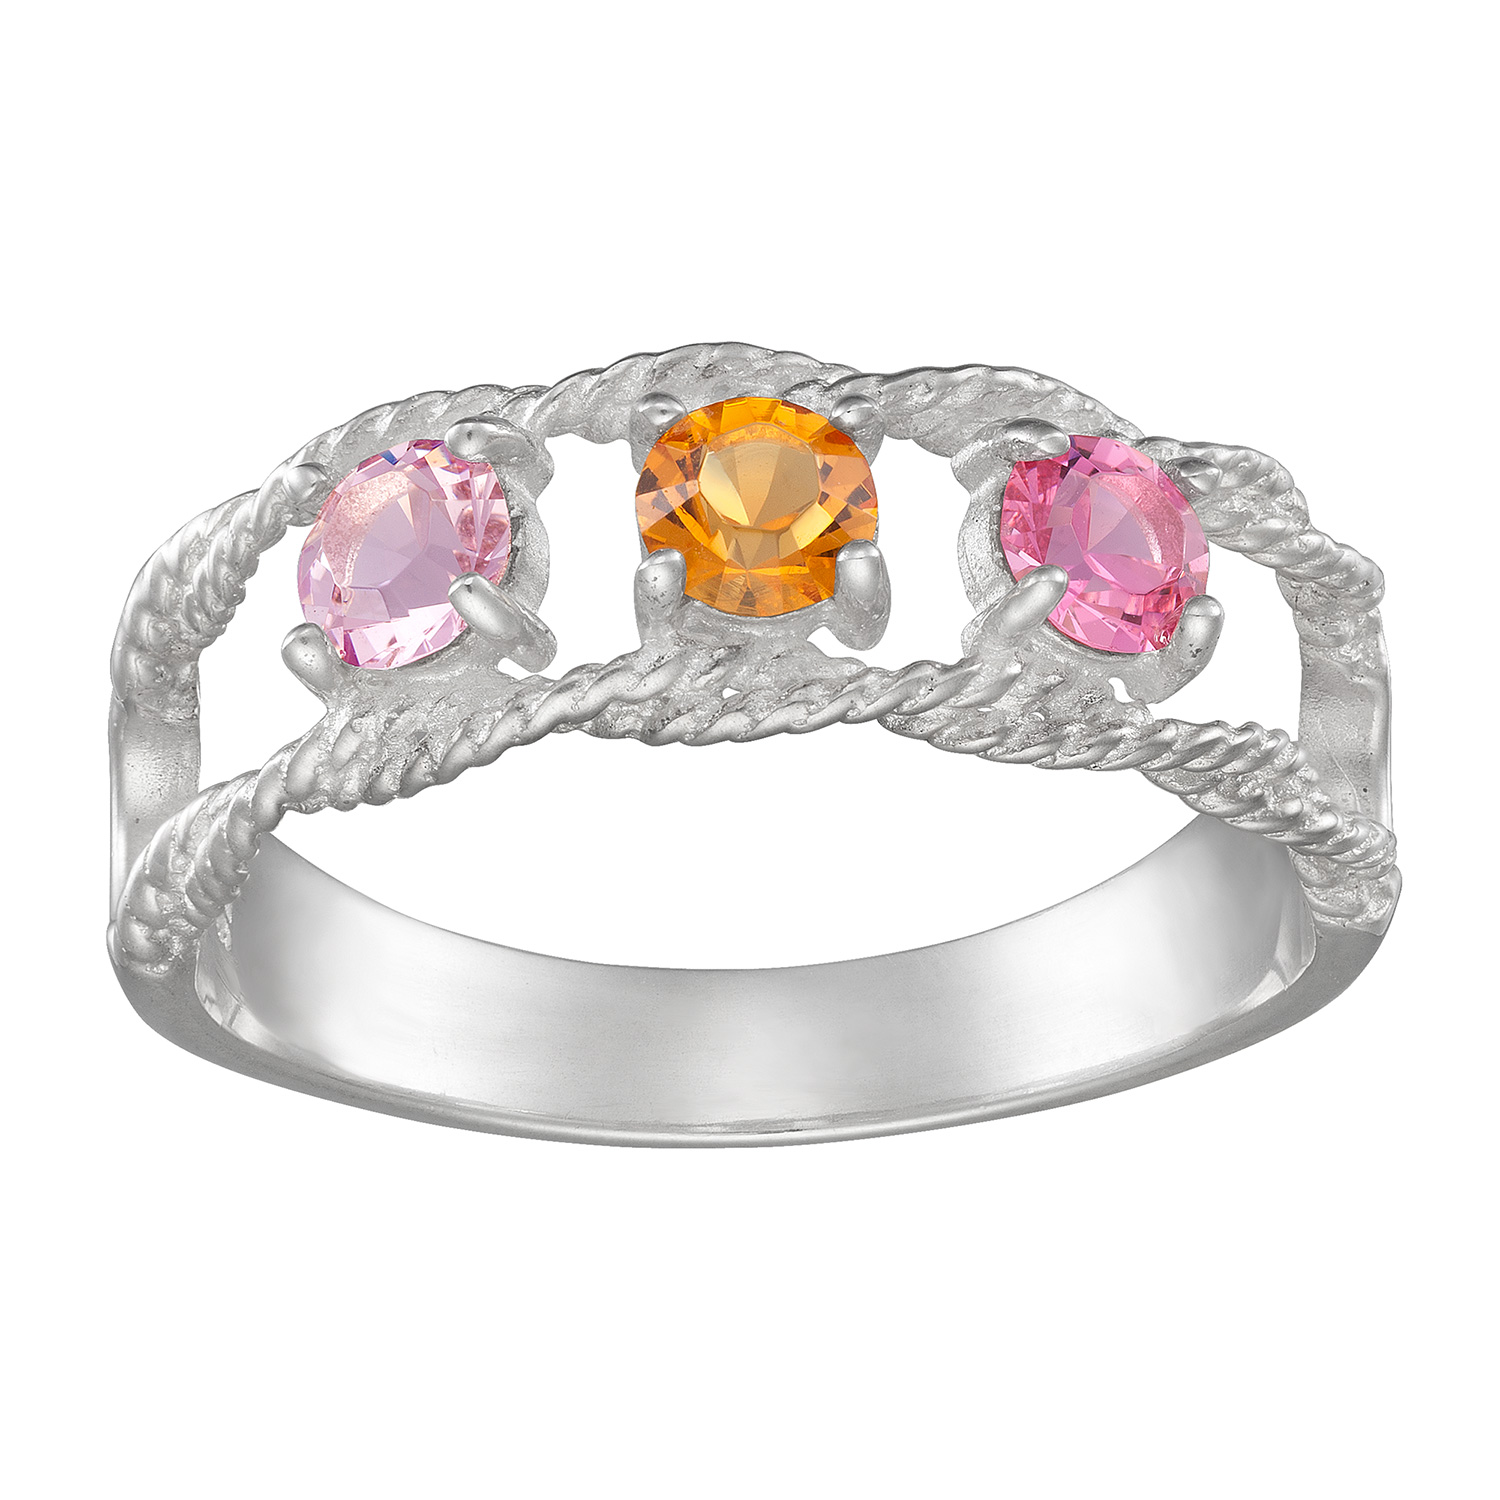 Sterling Silver Family Rope Birthstone Ring - 3 Stones